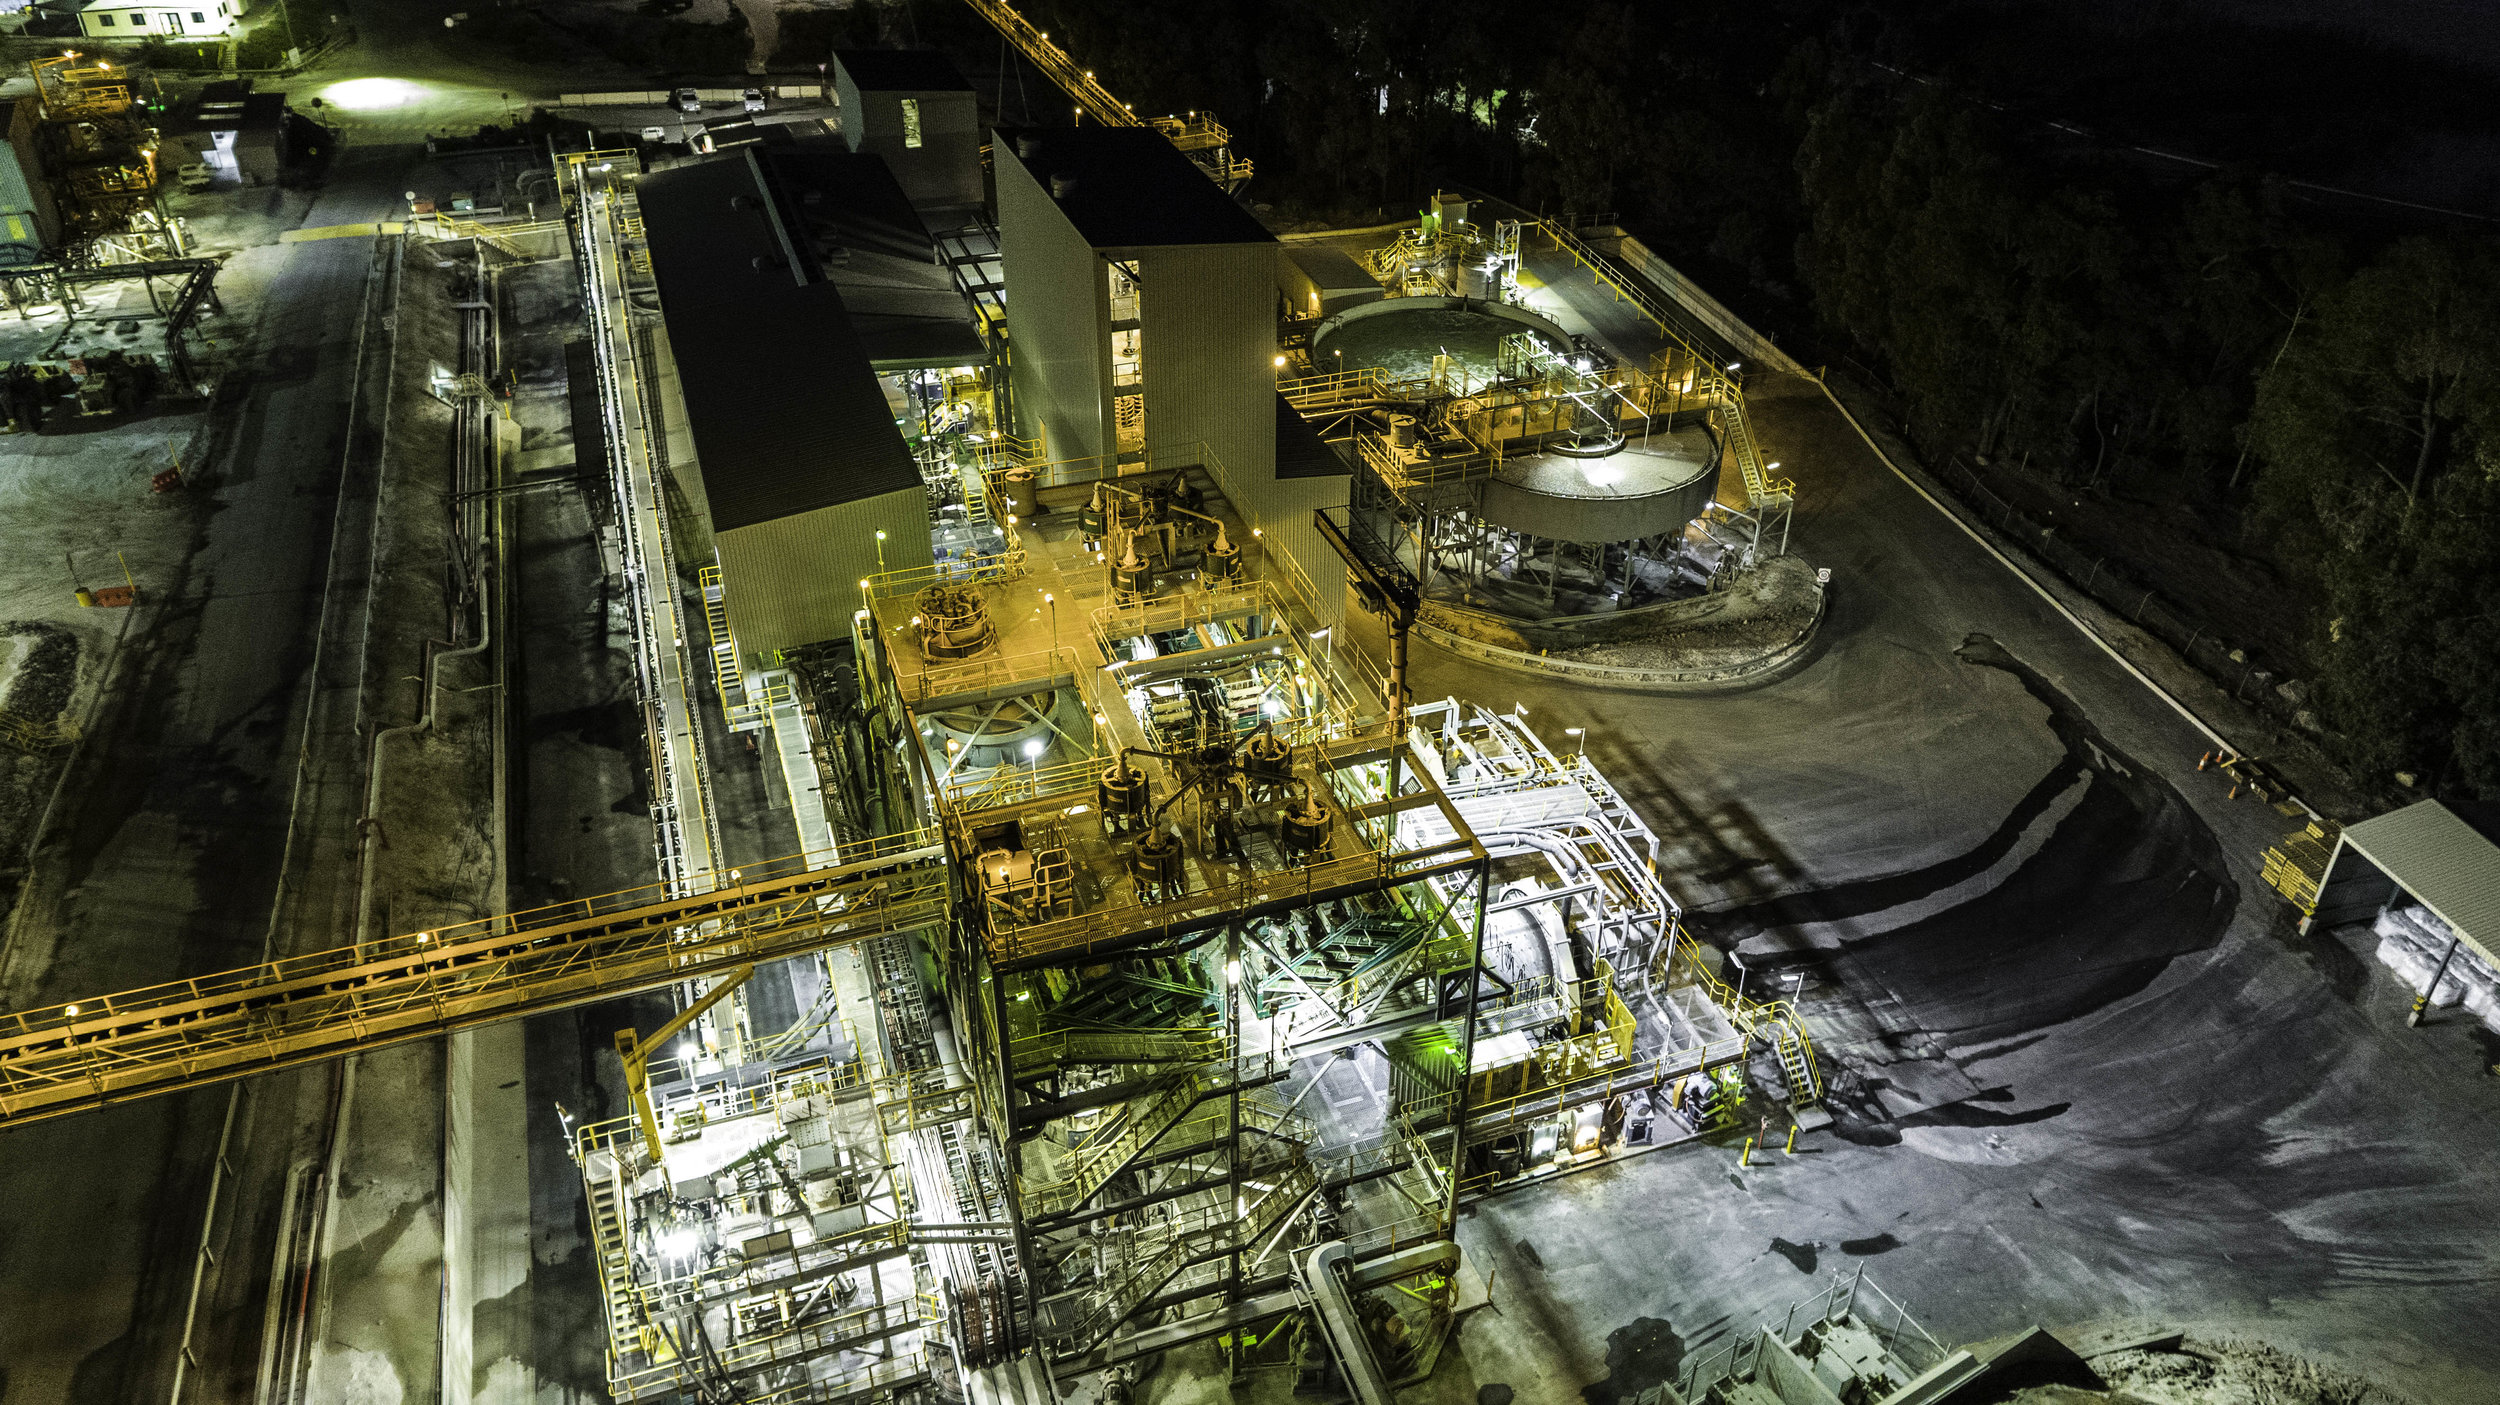 Talison Lithium CGP1 aerial view at night lower res.jpg